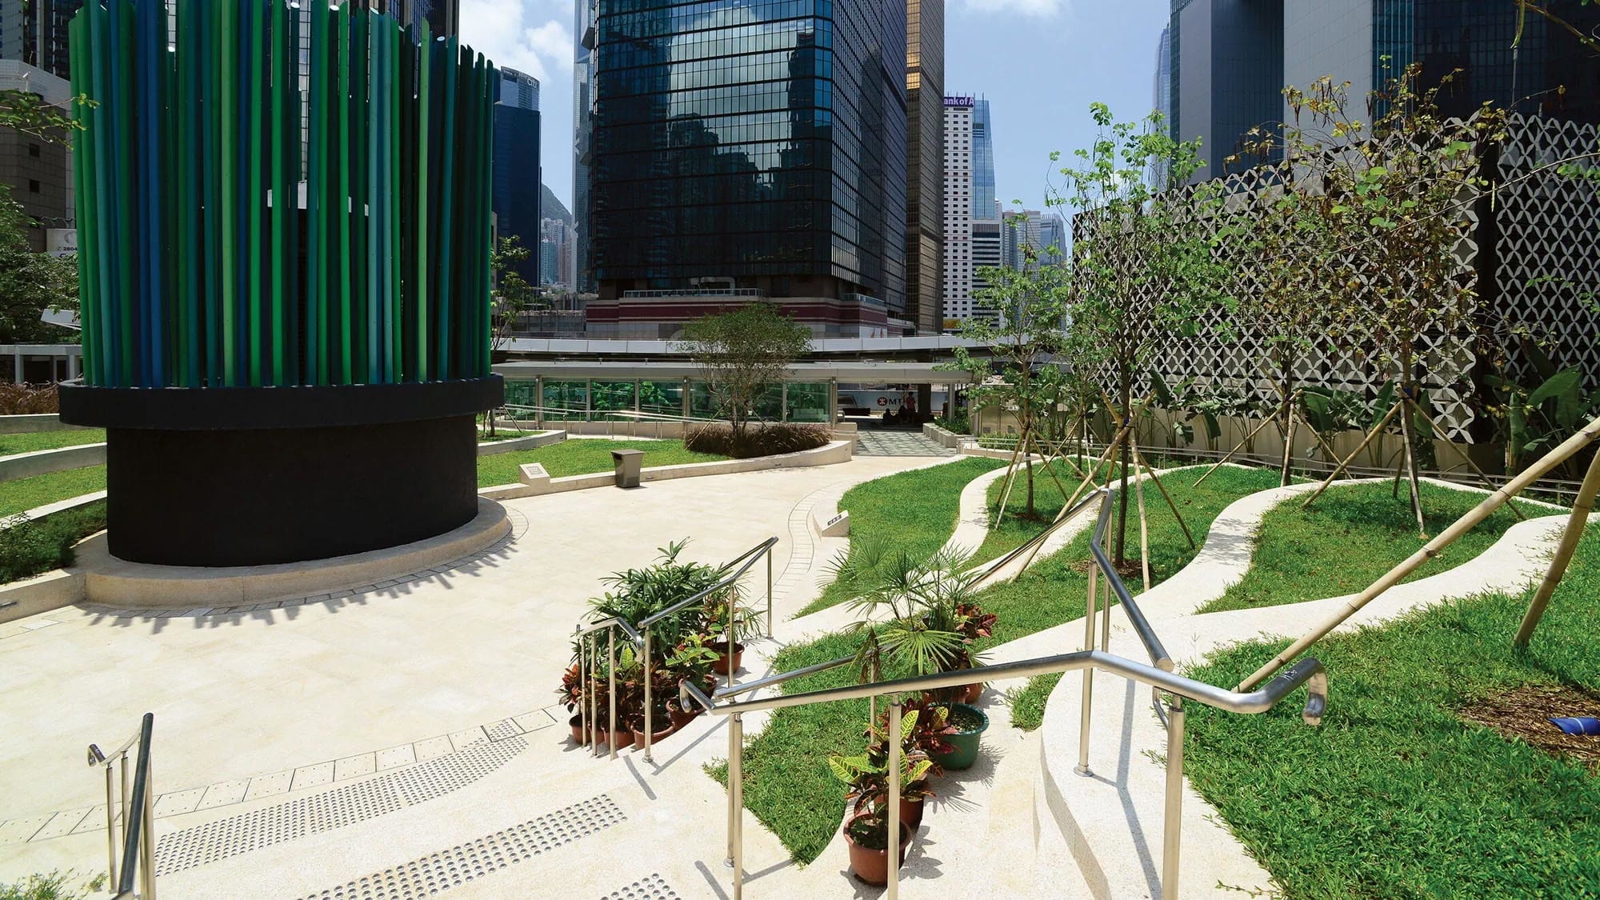 Admiralty Station above ground landscaping